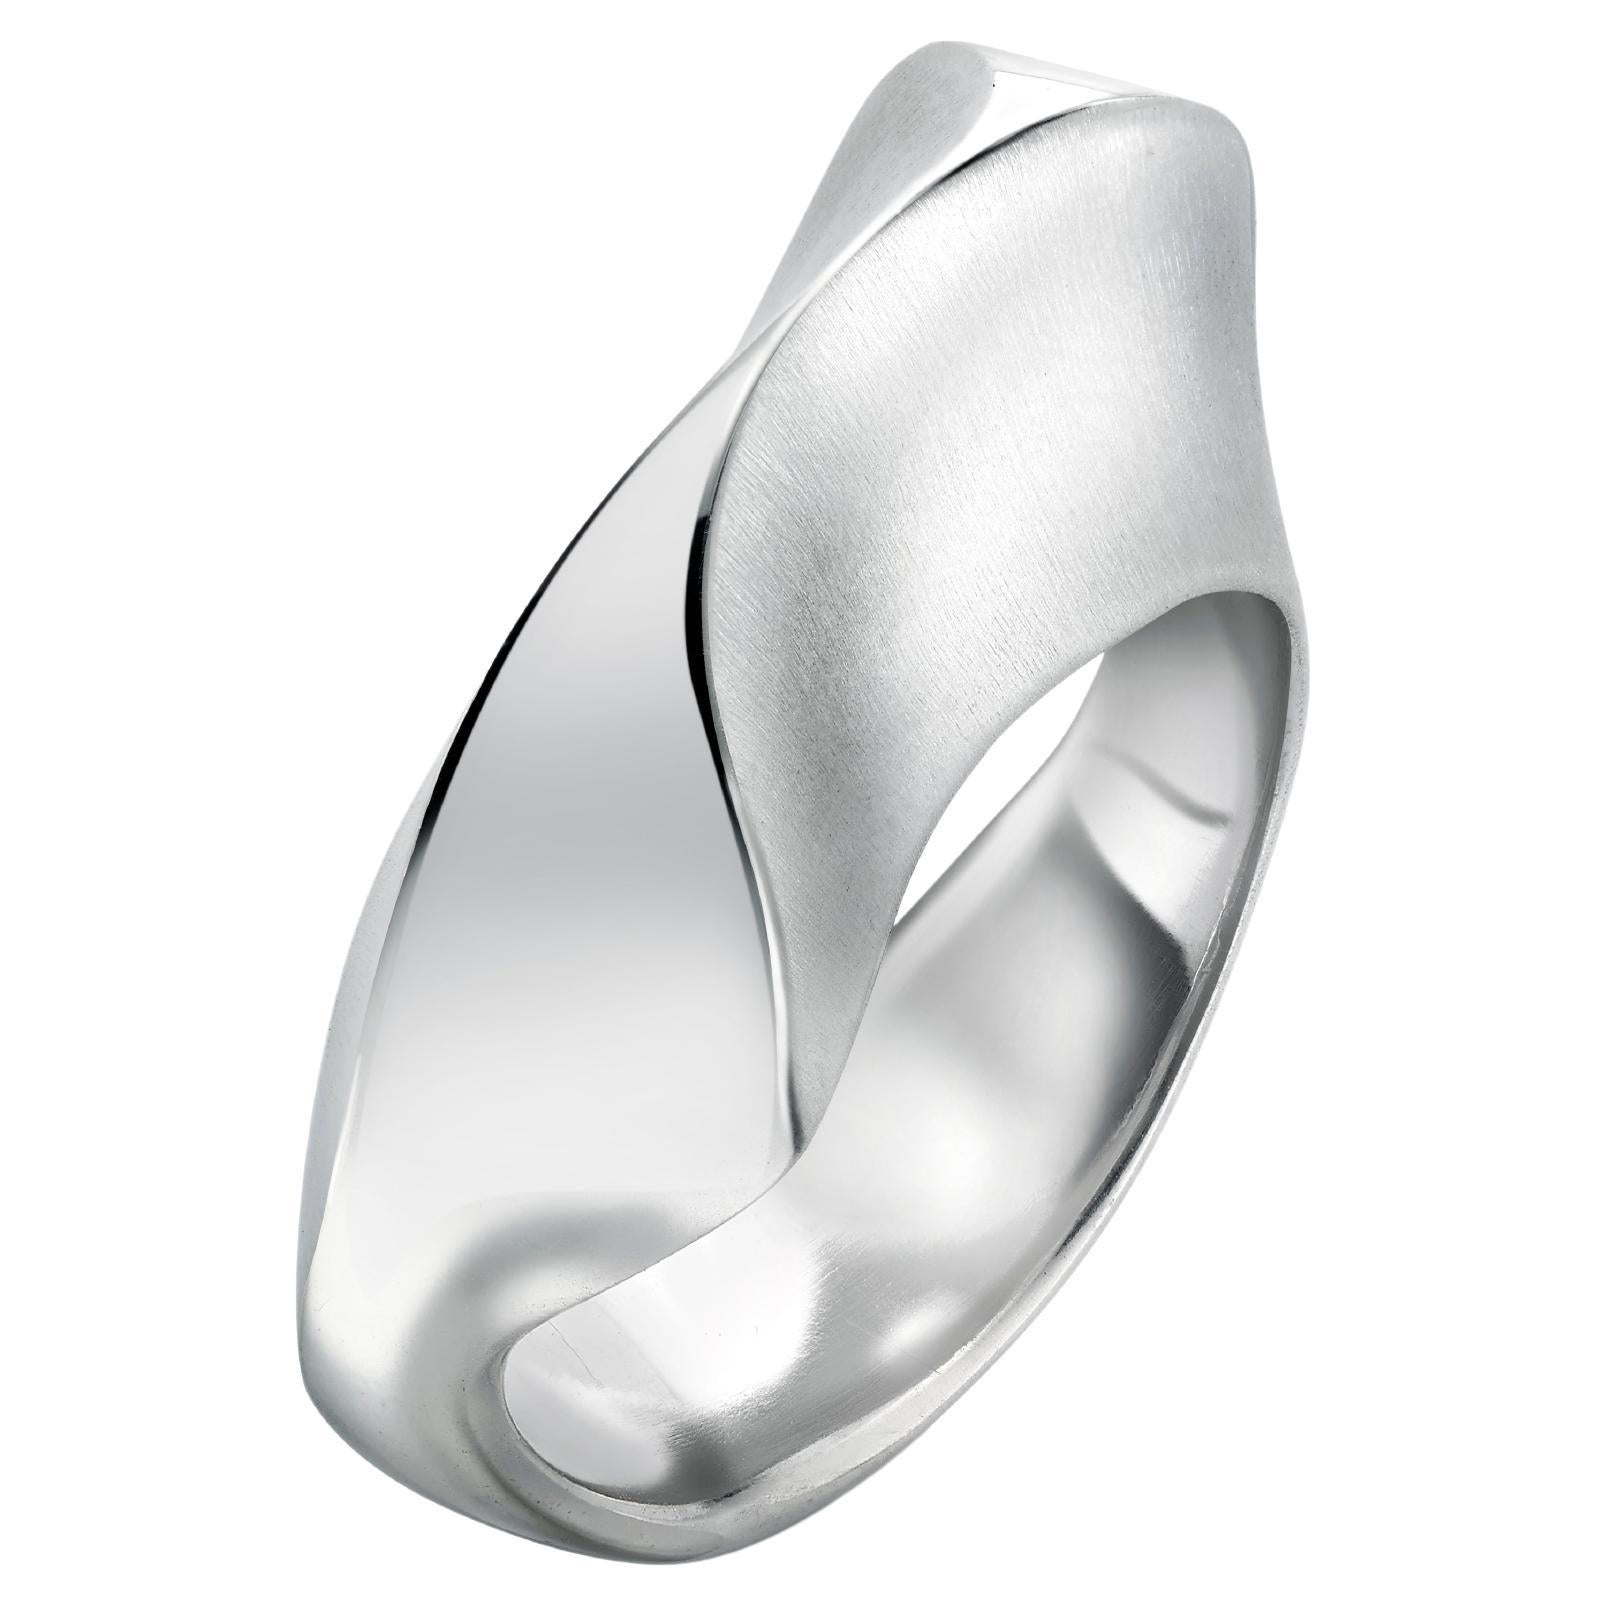 FOLDE RING Limited edition design in silver 